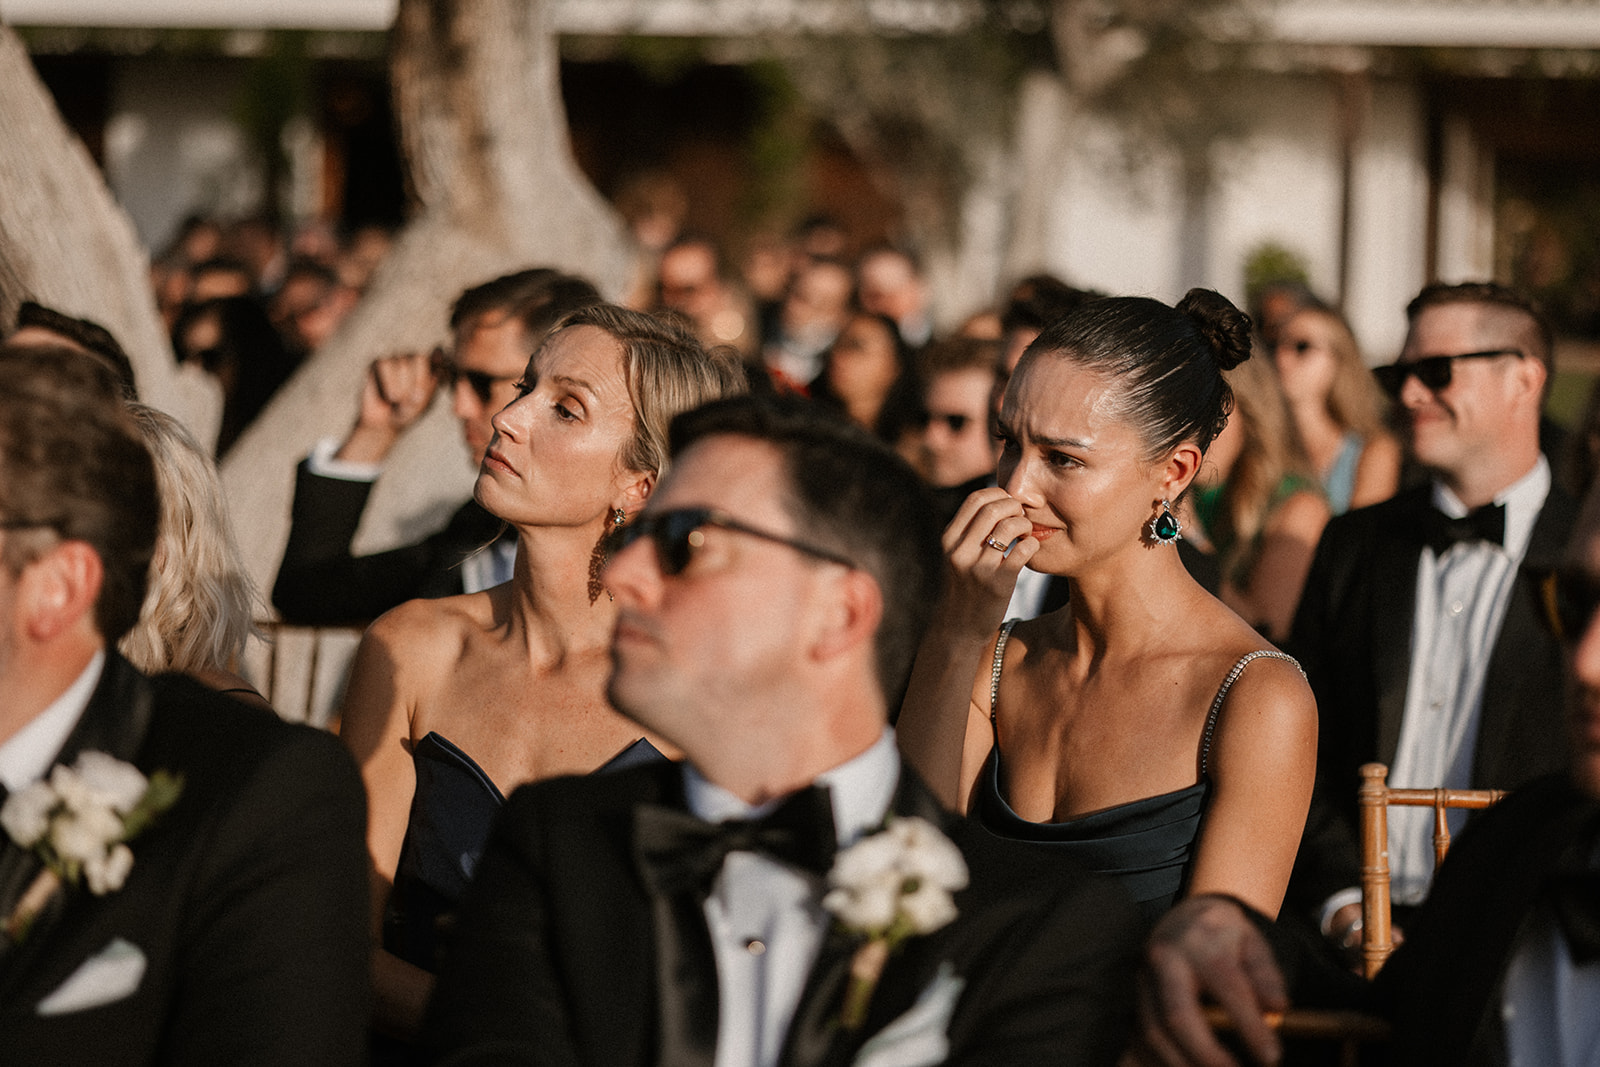 luxury wedding in andalusia